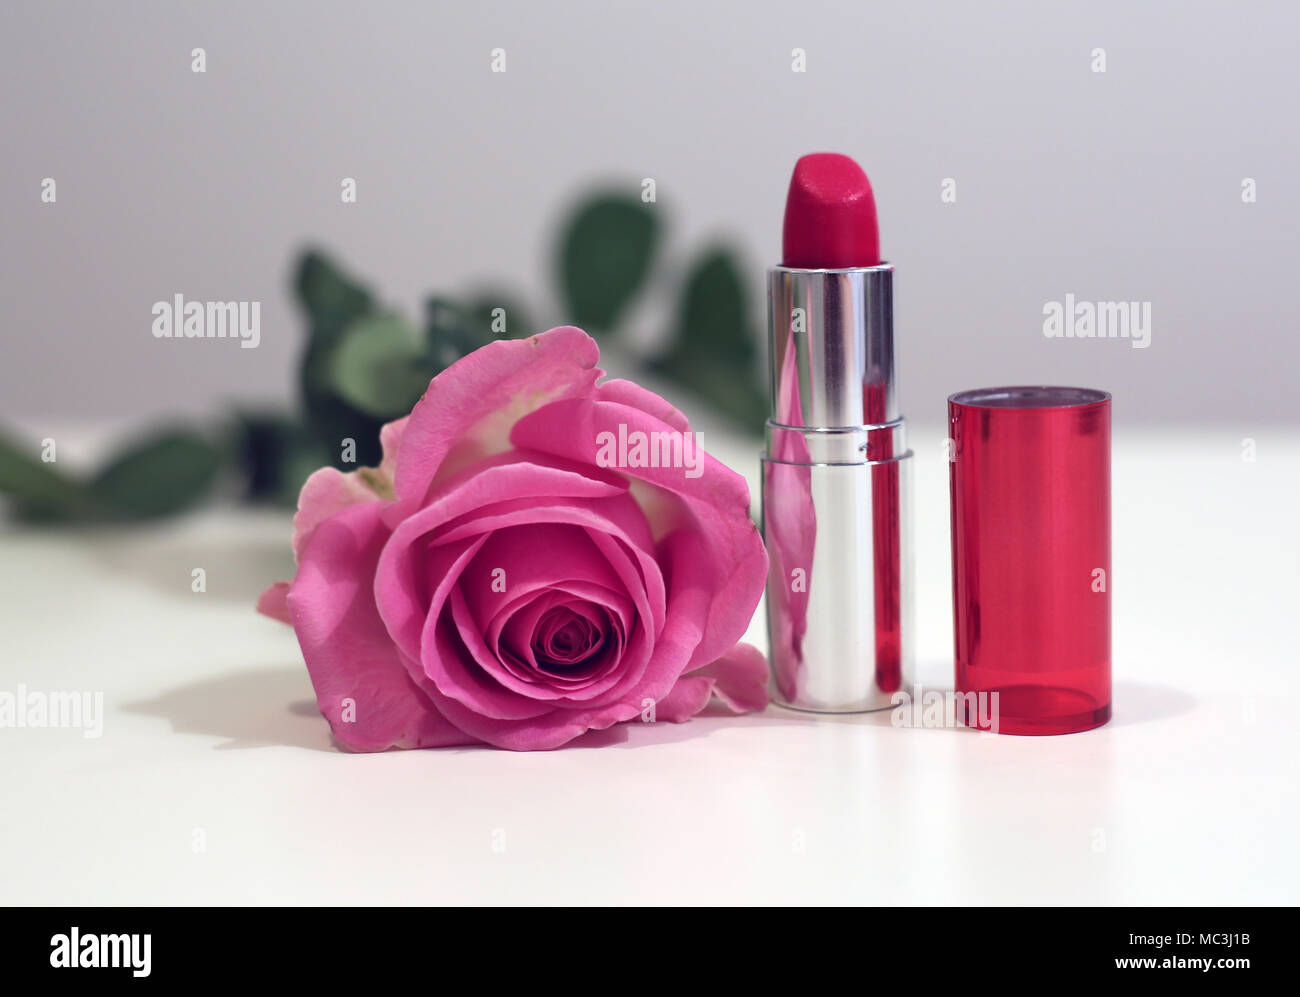 A pink romantic rose on a white table with a pink lipstick. Beautiful and feminine photo with a lot of trendy light tones and pink. Stock Photo